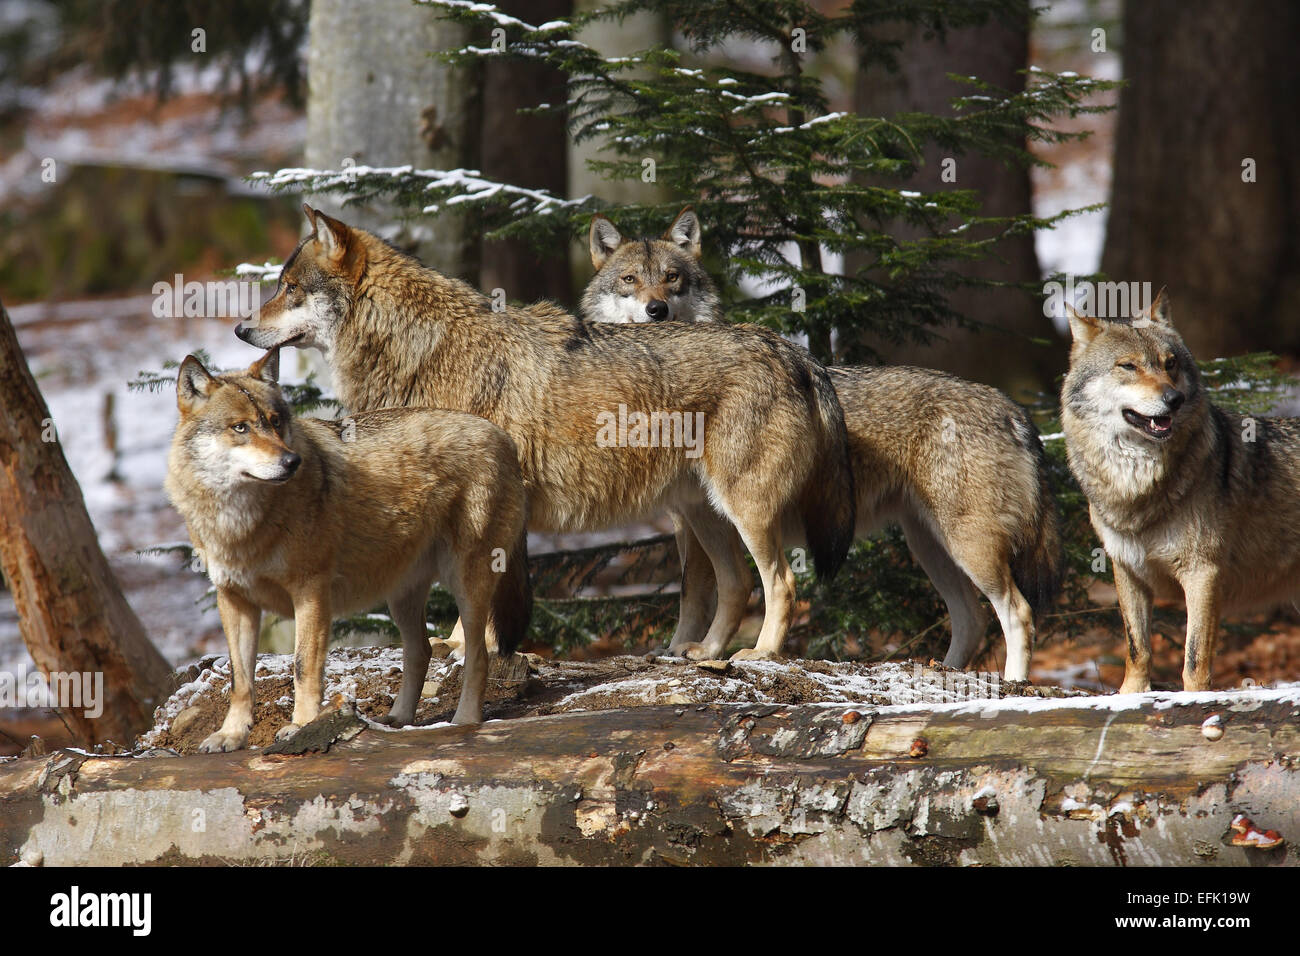 European Wolf, Canis lupus, Europe Banque D'Images